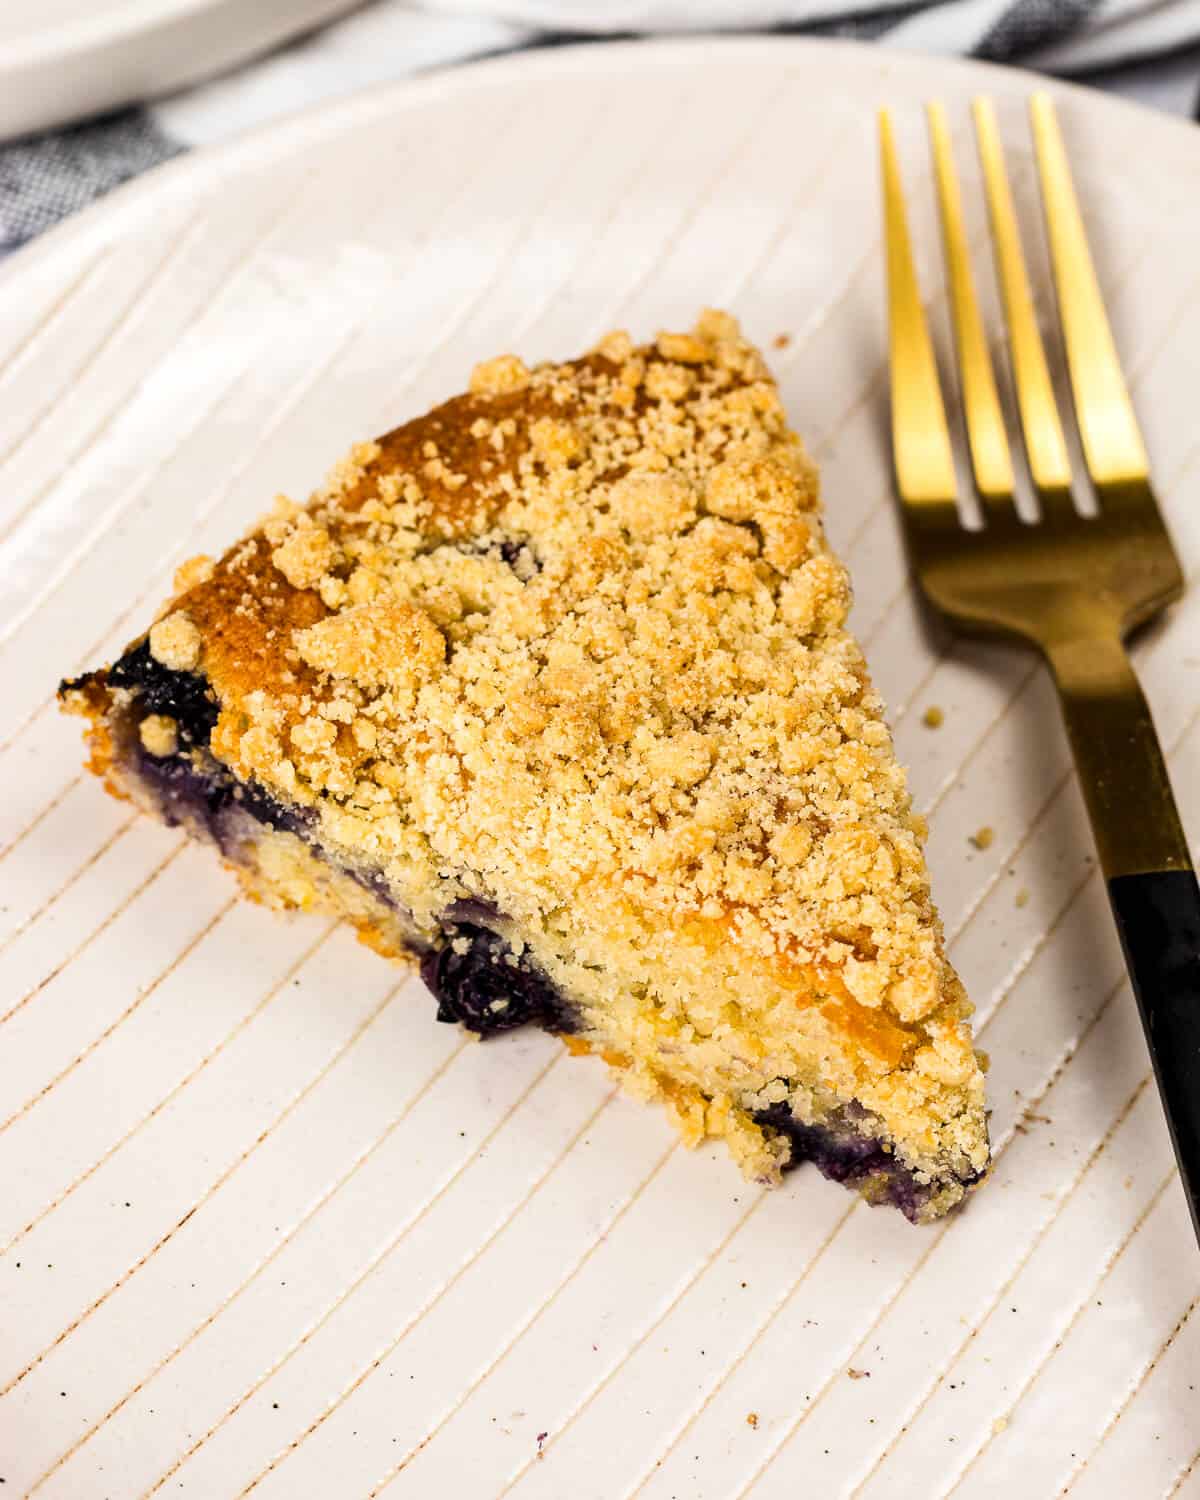 A slice of blueberry crumble cake on a white plate with a fork on the right.